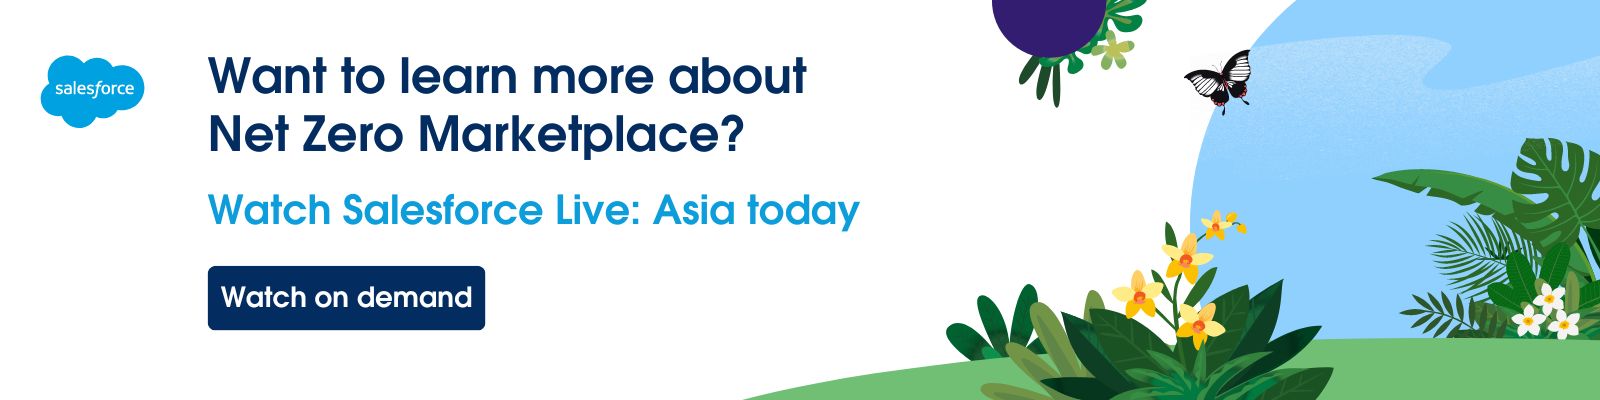 Find out more about Net Zero Marketplace. Watch Salesforce Live: Asia on demand.